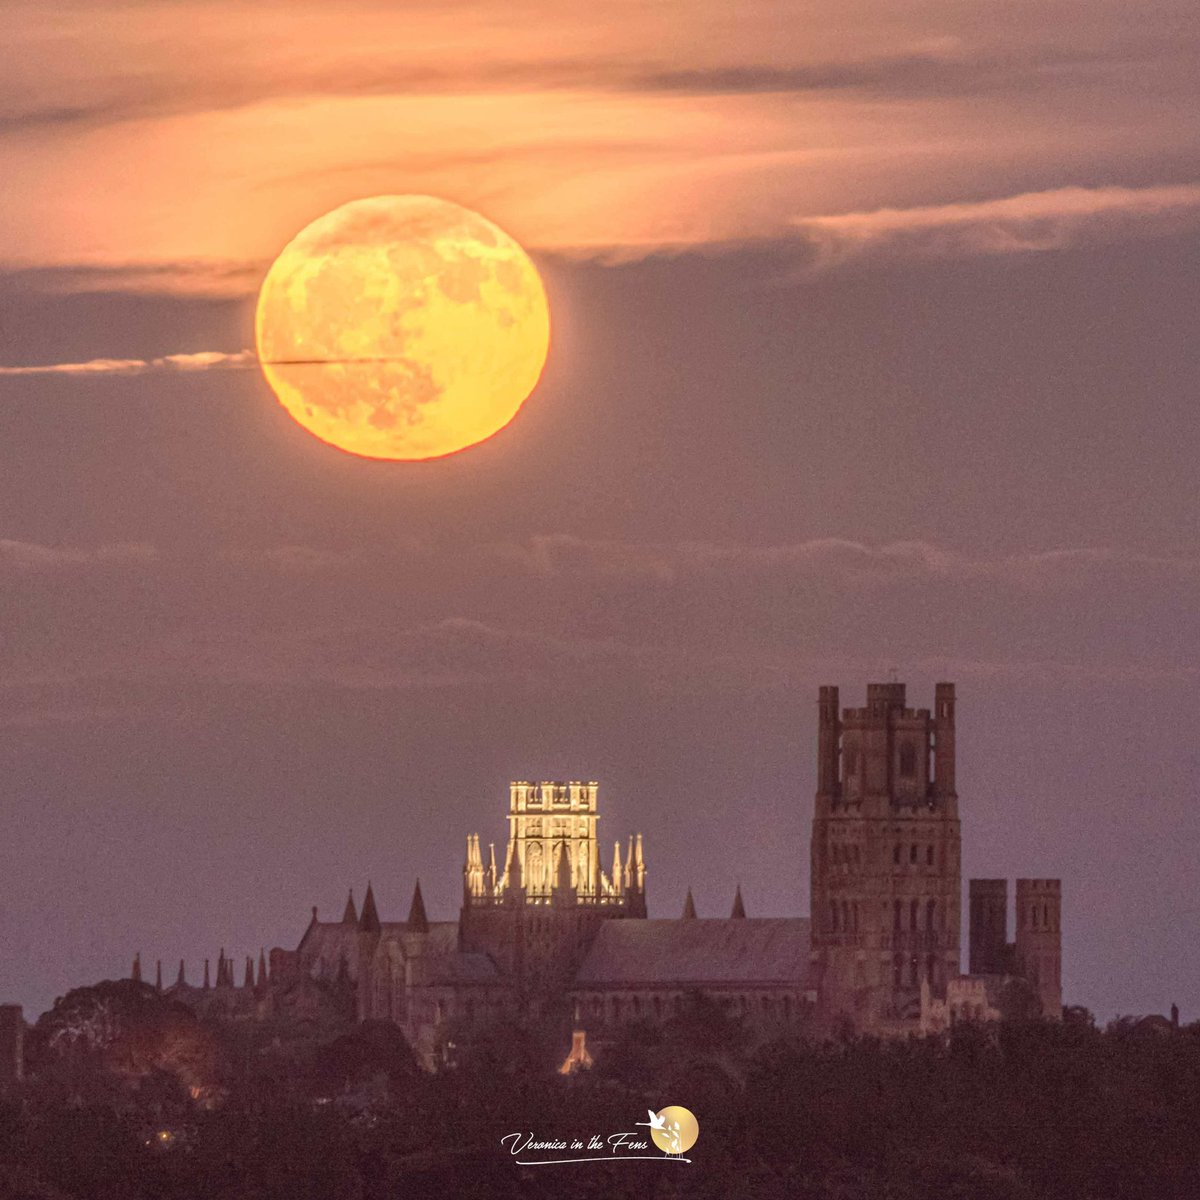 The wonderful full moon over Ely Cathedral as it was rising last night night 😍 Ely, Cambridgeshire #FullMoon #Stormhour